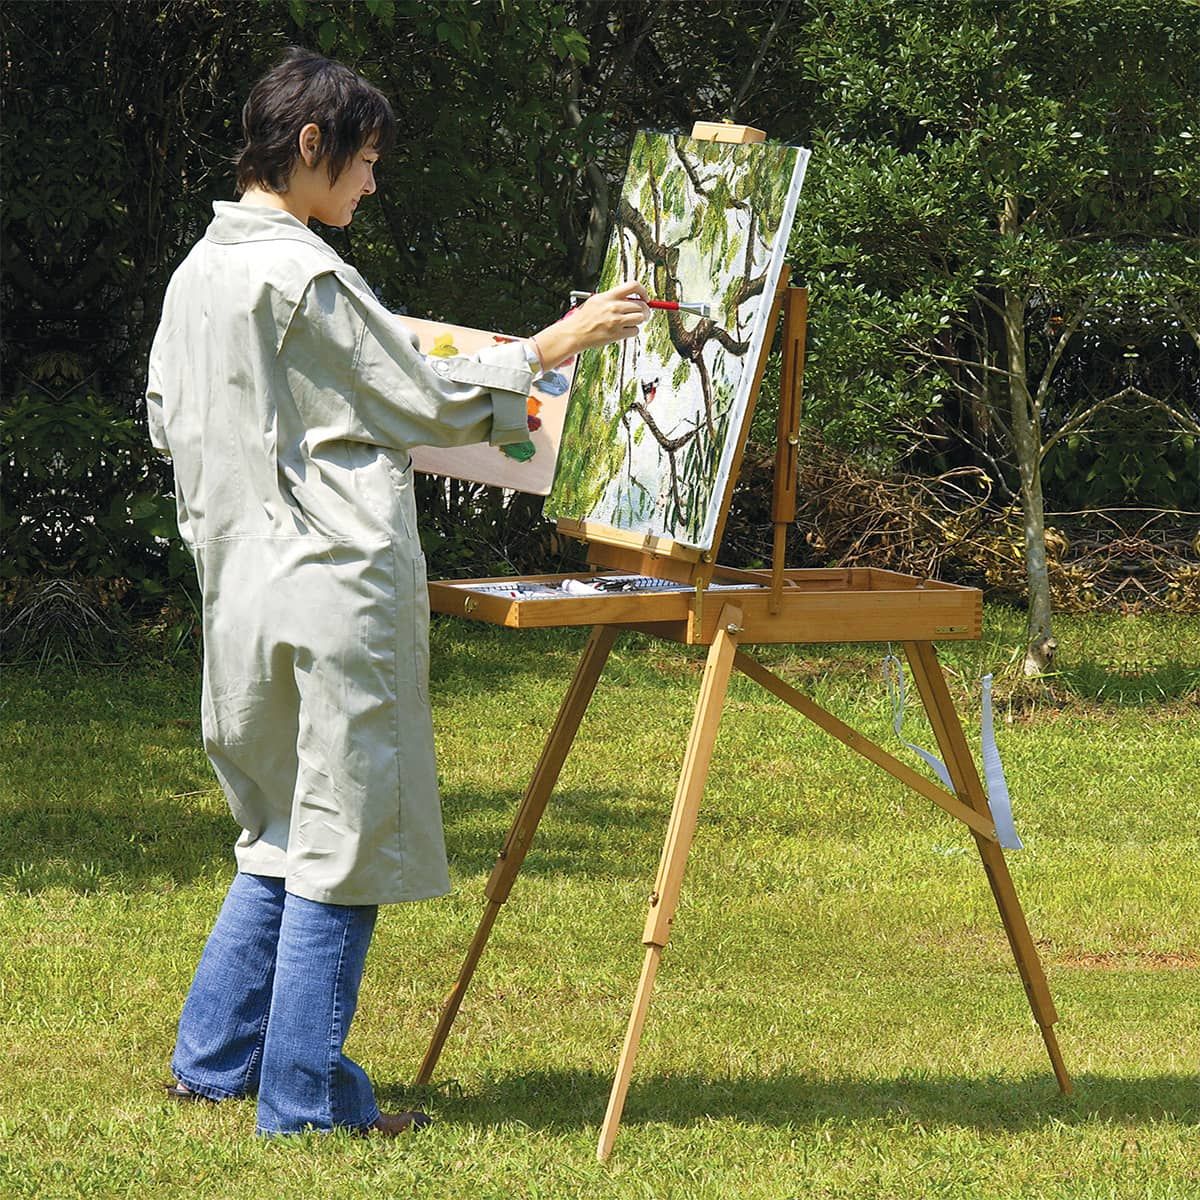 Sturdy and compact, the ideal french easel for Home, studio, and field!